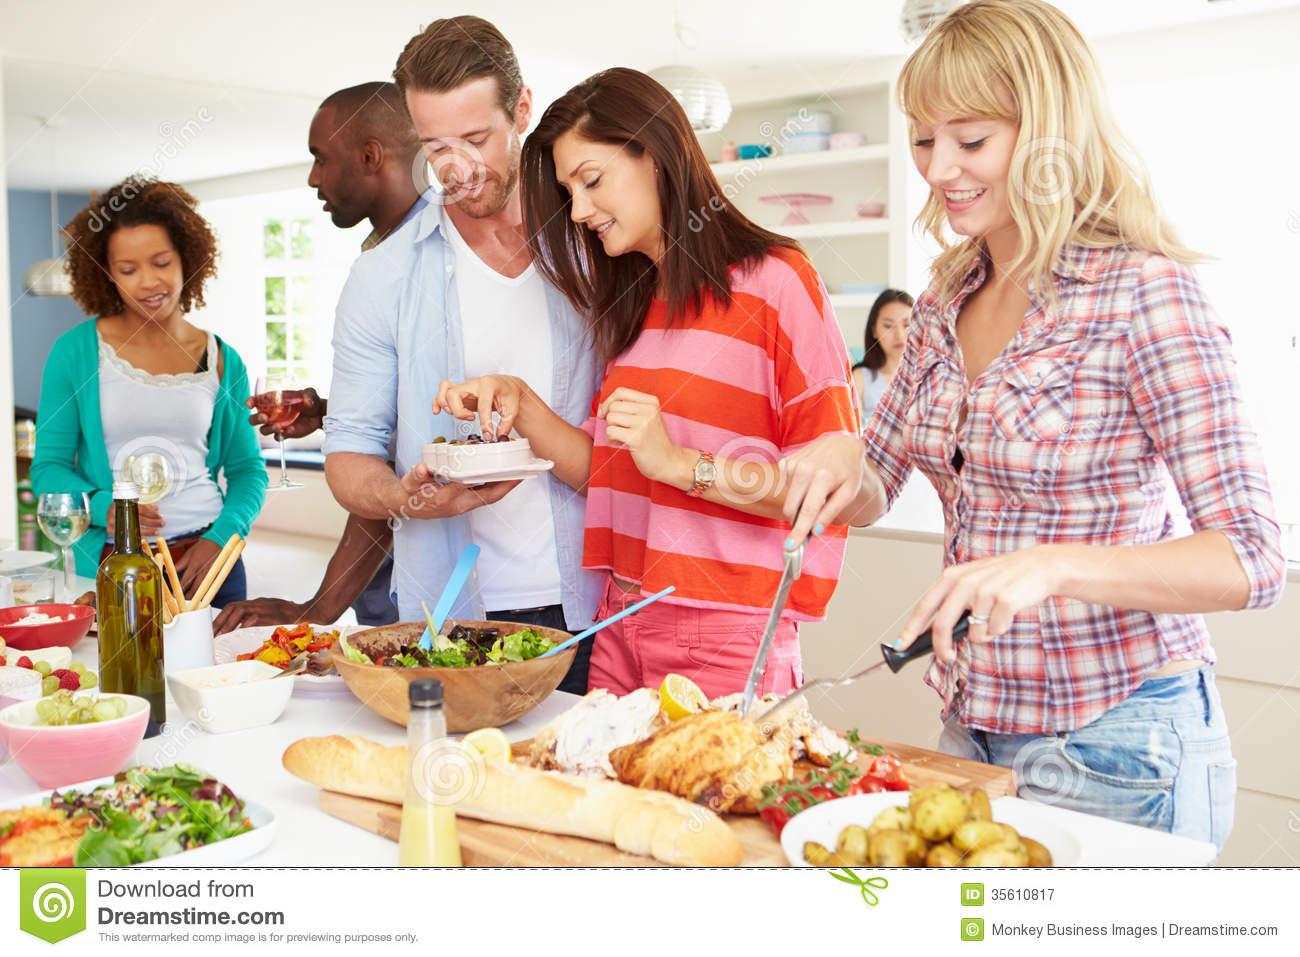 Free Stock Photography  Group Of Friends Having Dinner Party At Home